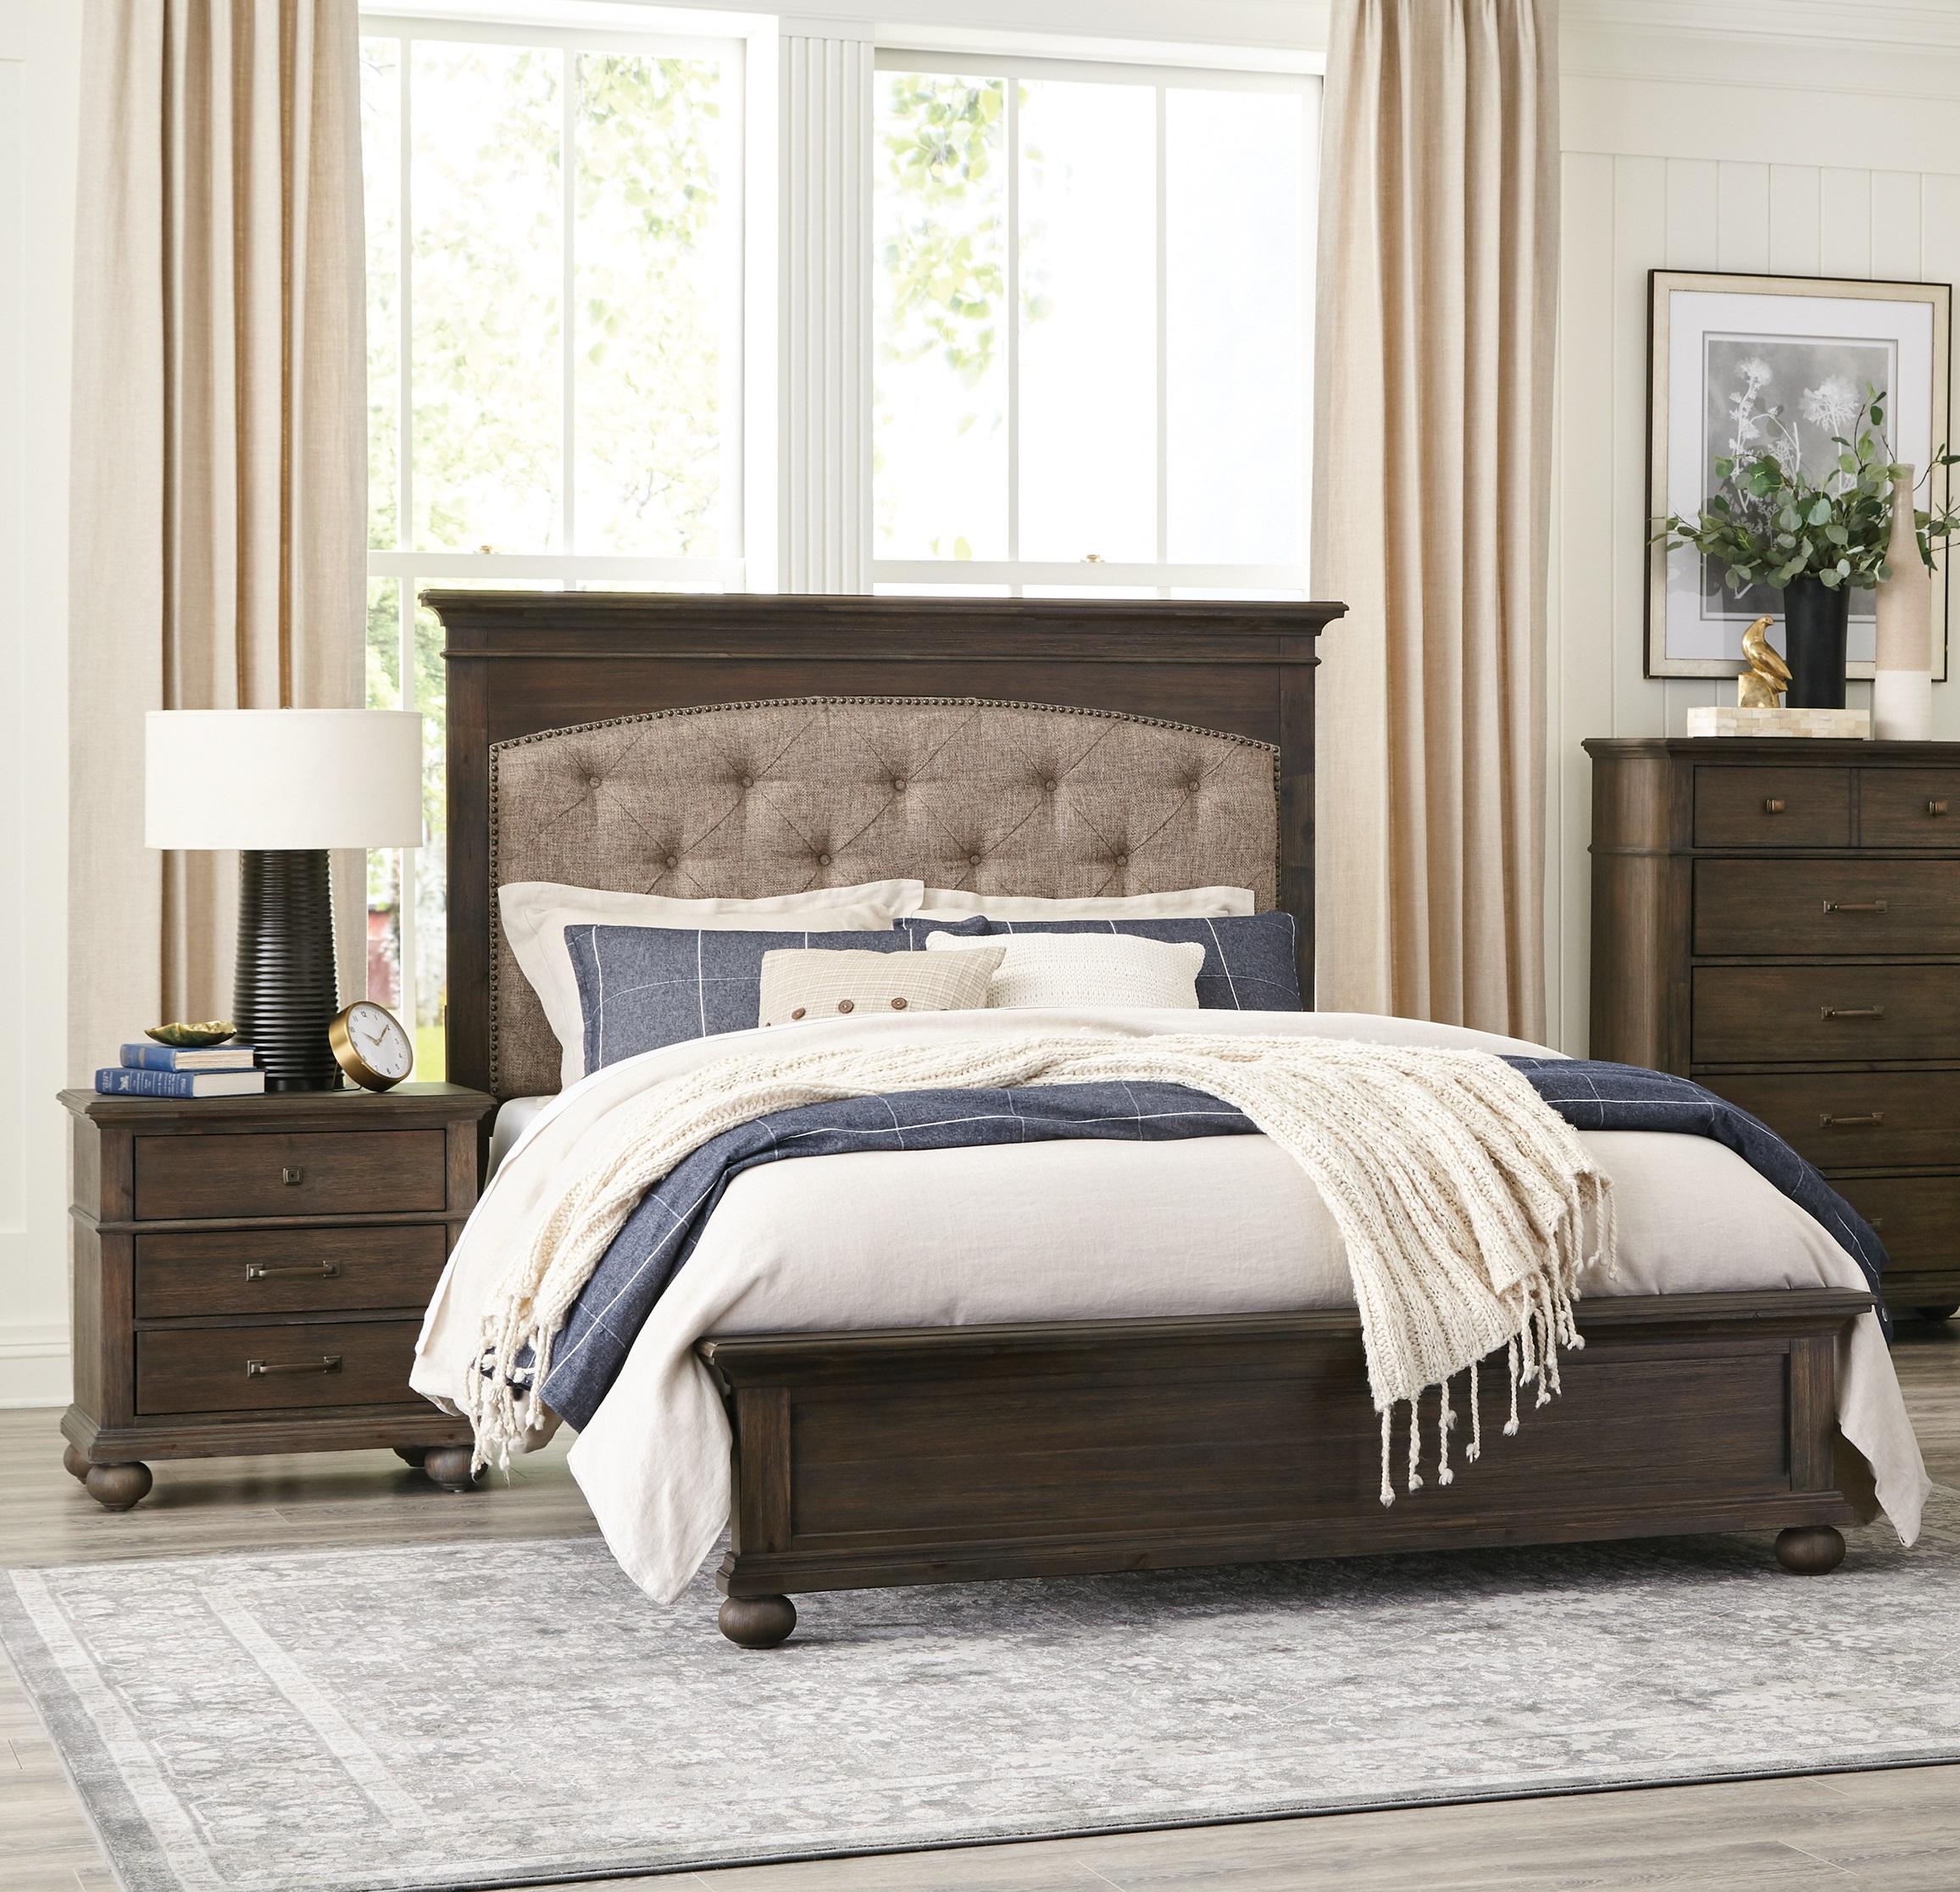 Classic Bed and 2 Nightstands Set 1400K-1CK*-3PC Motsinger 1400K-1CK*-3PC in Rustic Brown Polyester